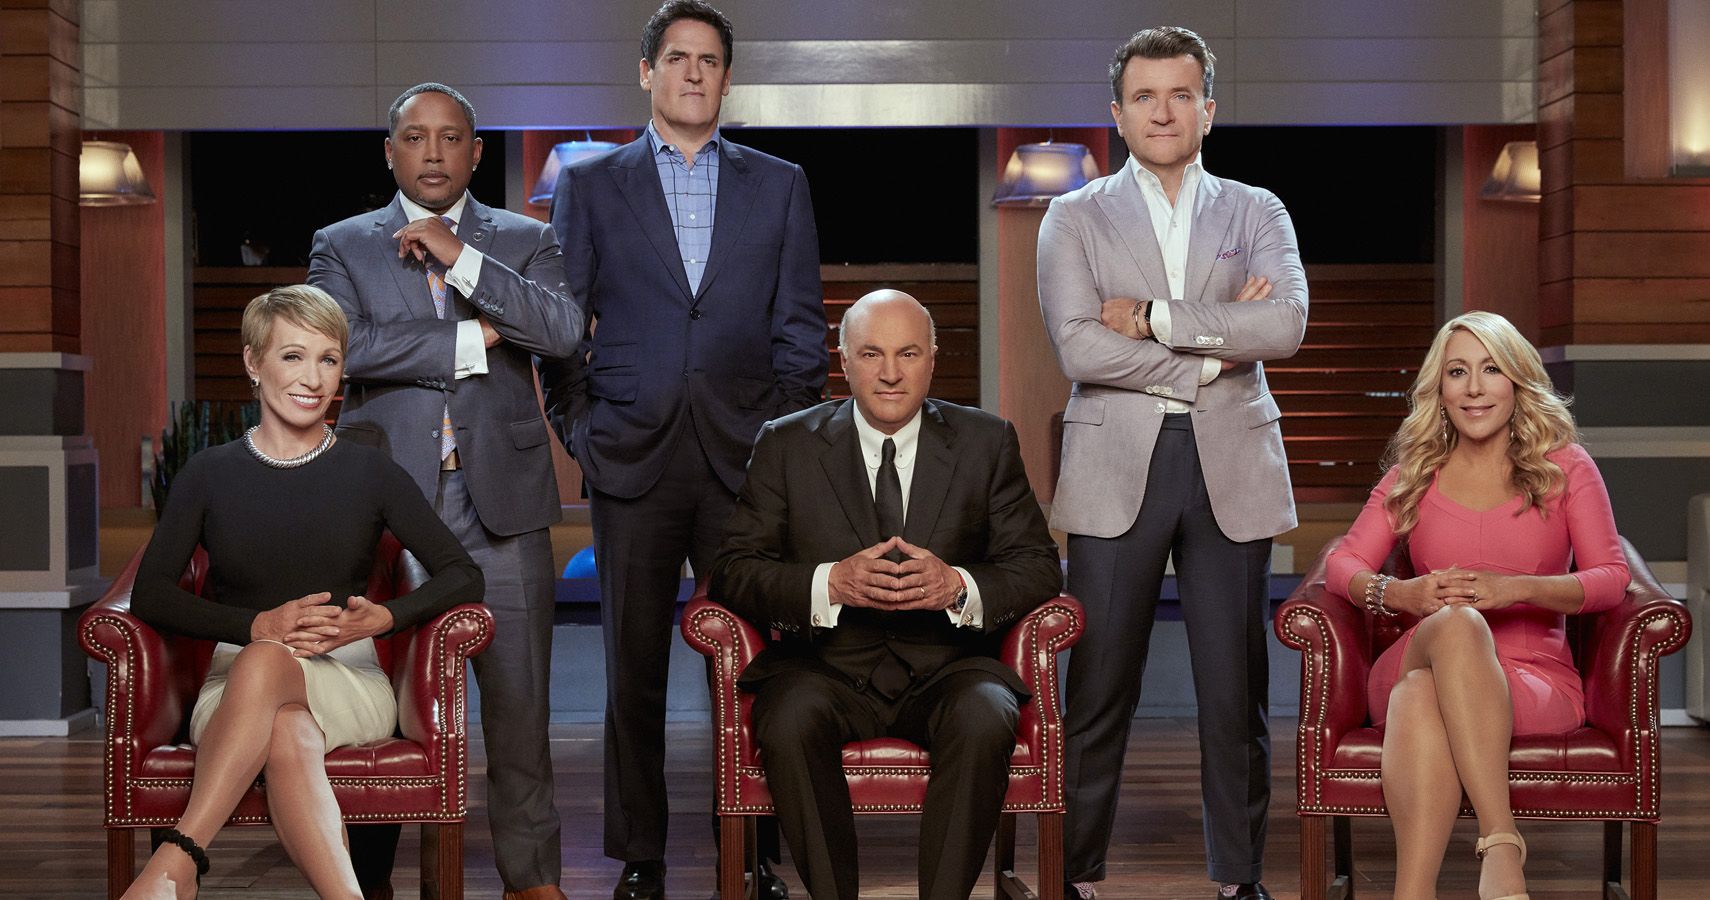 Shark Tank: The 15 Worst Pitches The Sharks Passed On (And The 10 Best)